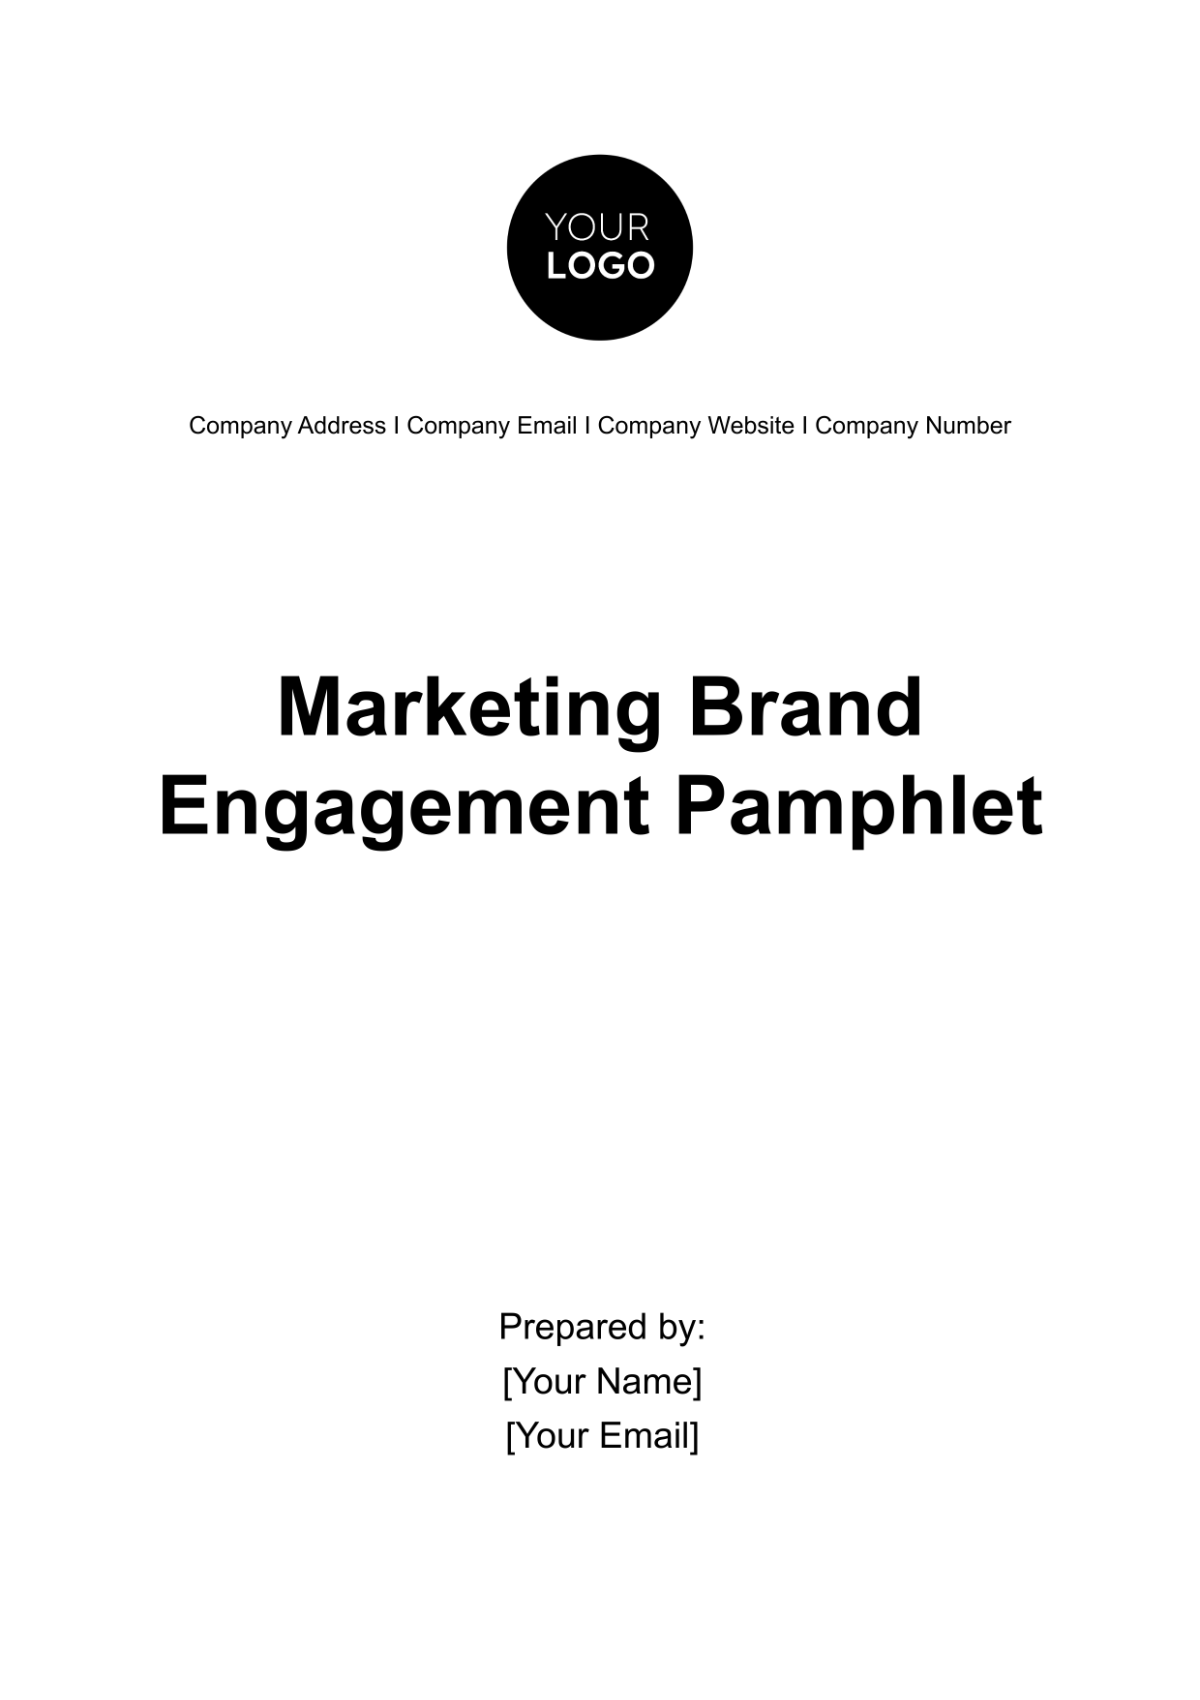 Free Marketing Brand Engagement Pamphlet Template